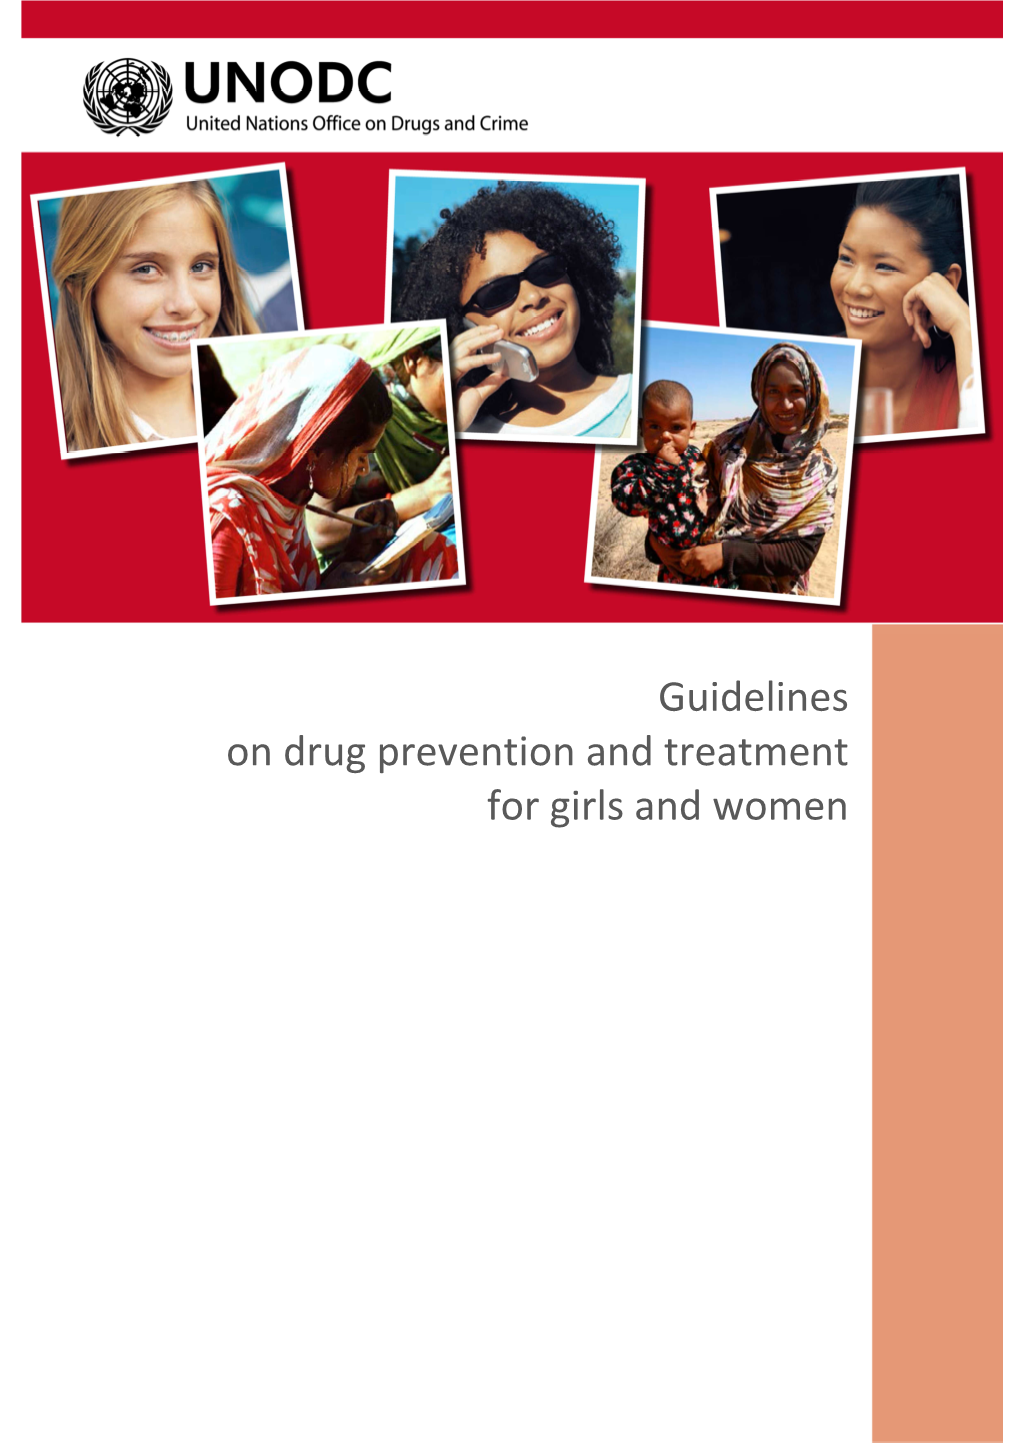 Guidelines on Drug Prevention and Treatment for Girls and Women